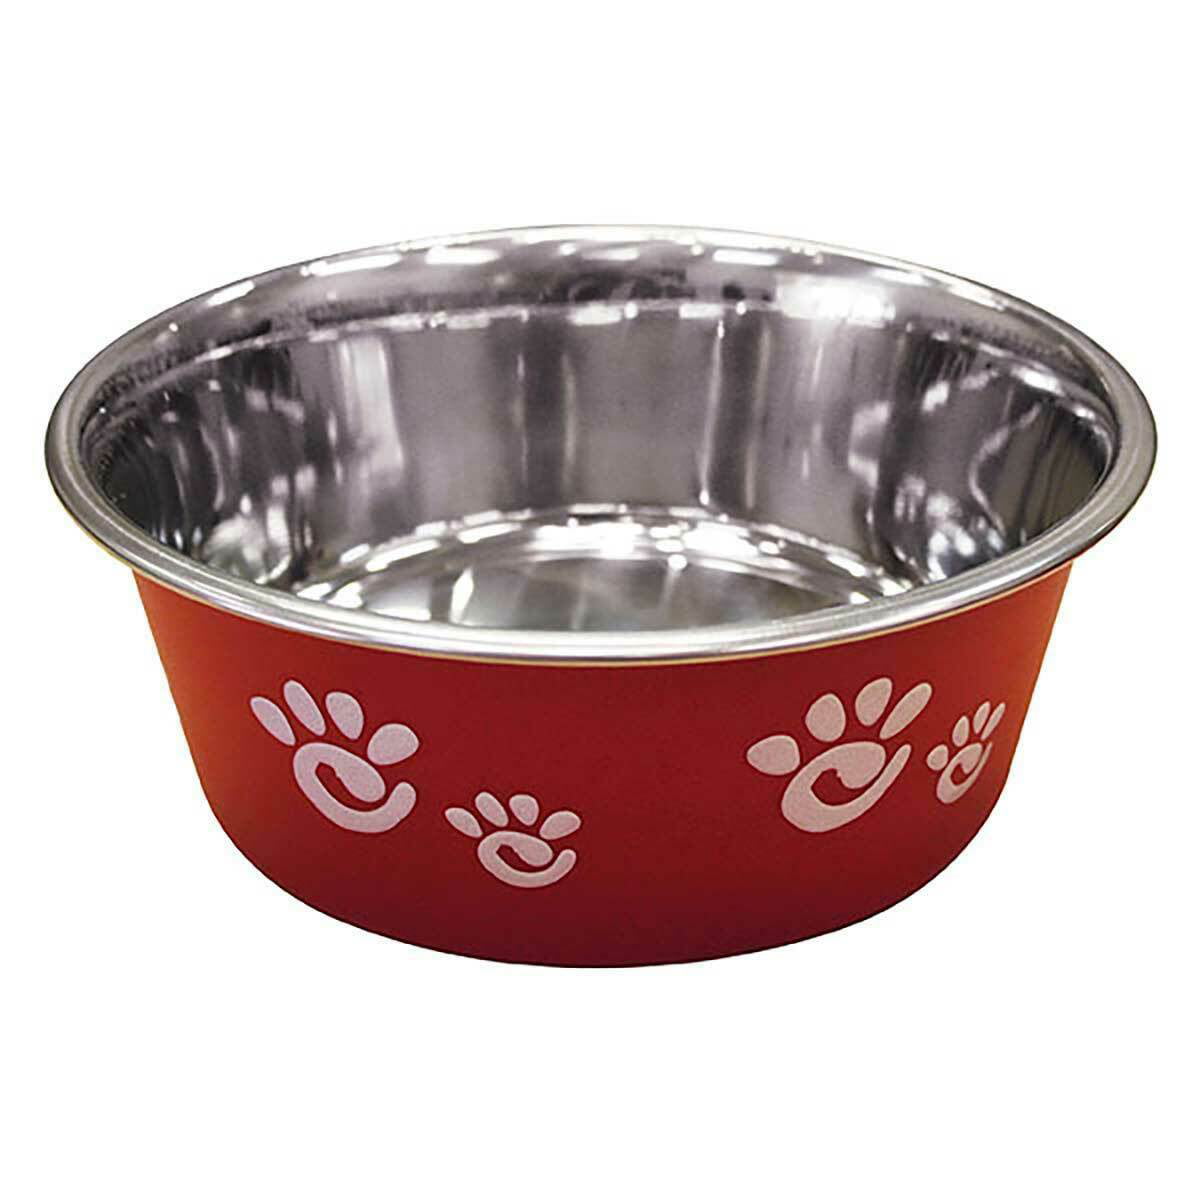 Pawprint Dog Bowls Stainless Steel Pet Dishes Choose Red Black or